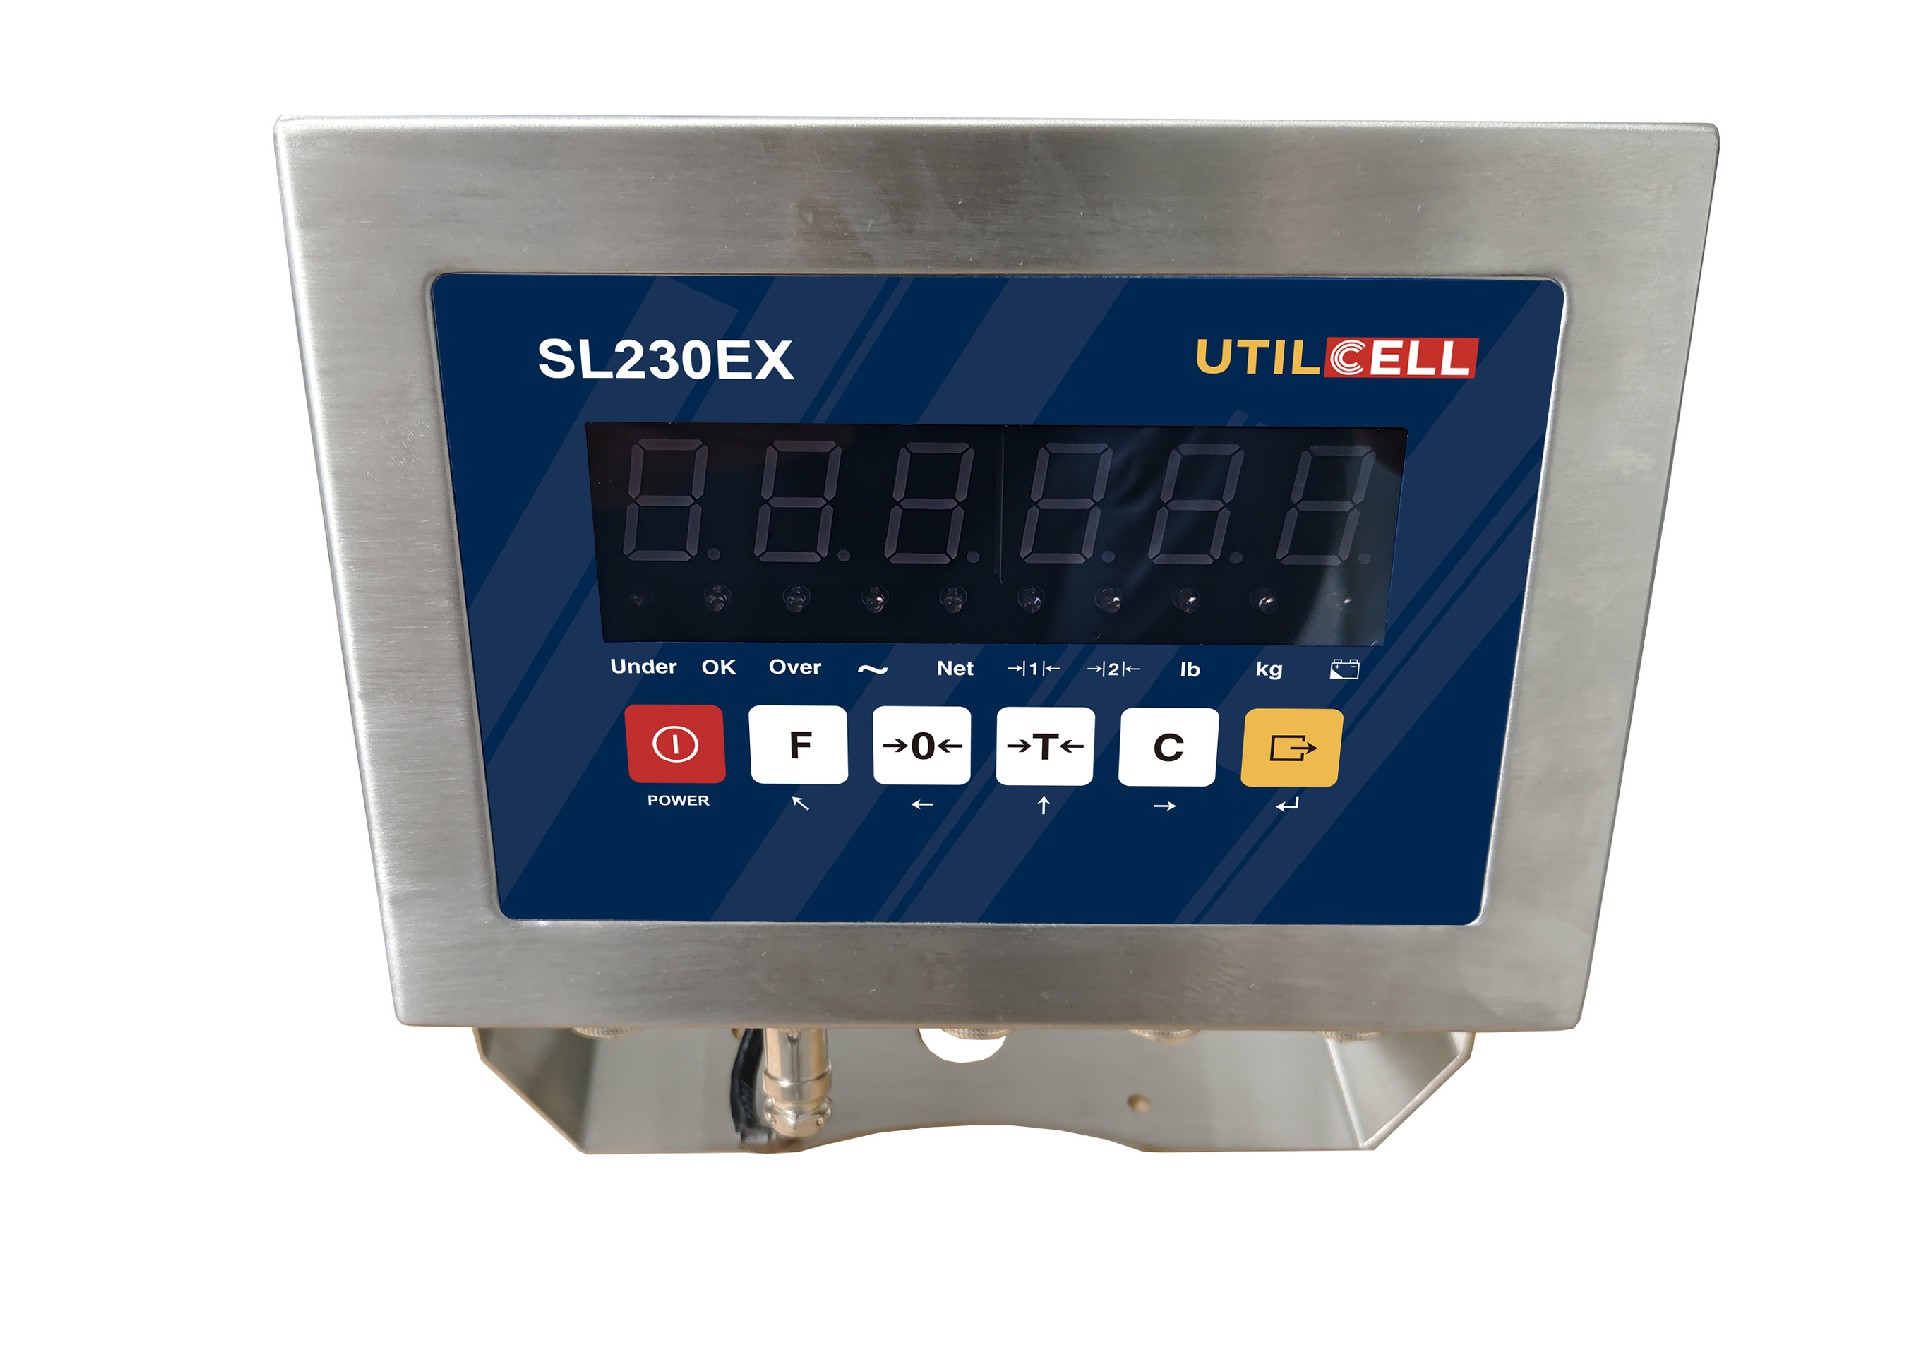 SILVER LAKE UTIL CELL Explosion-proof weighing indicator UTIL CELL